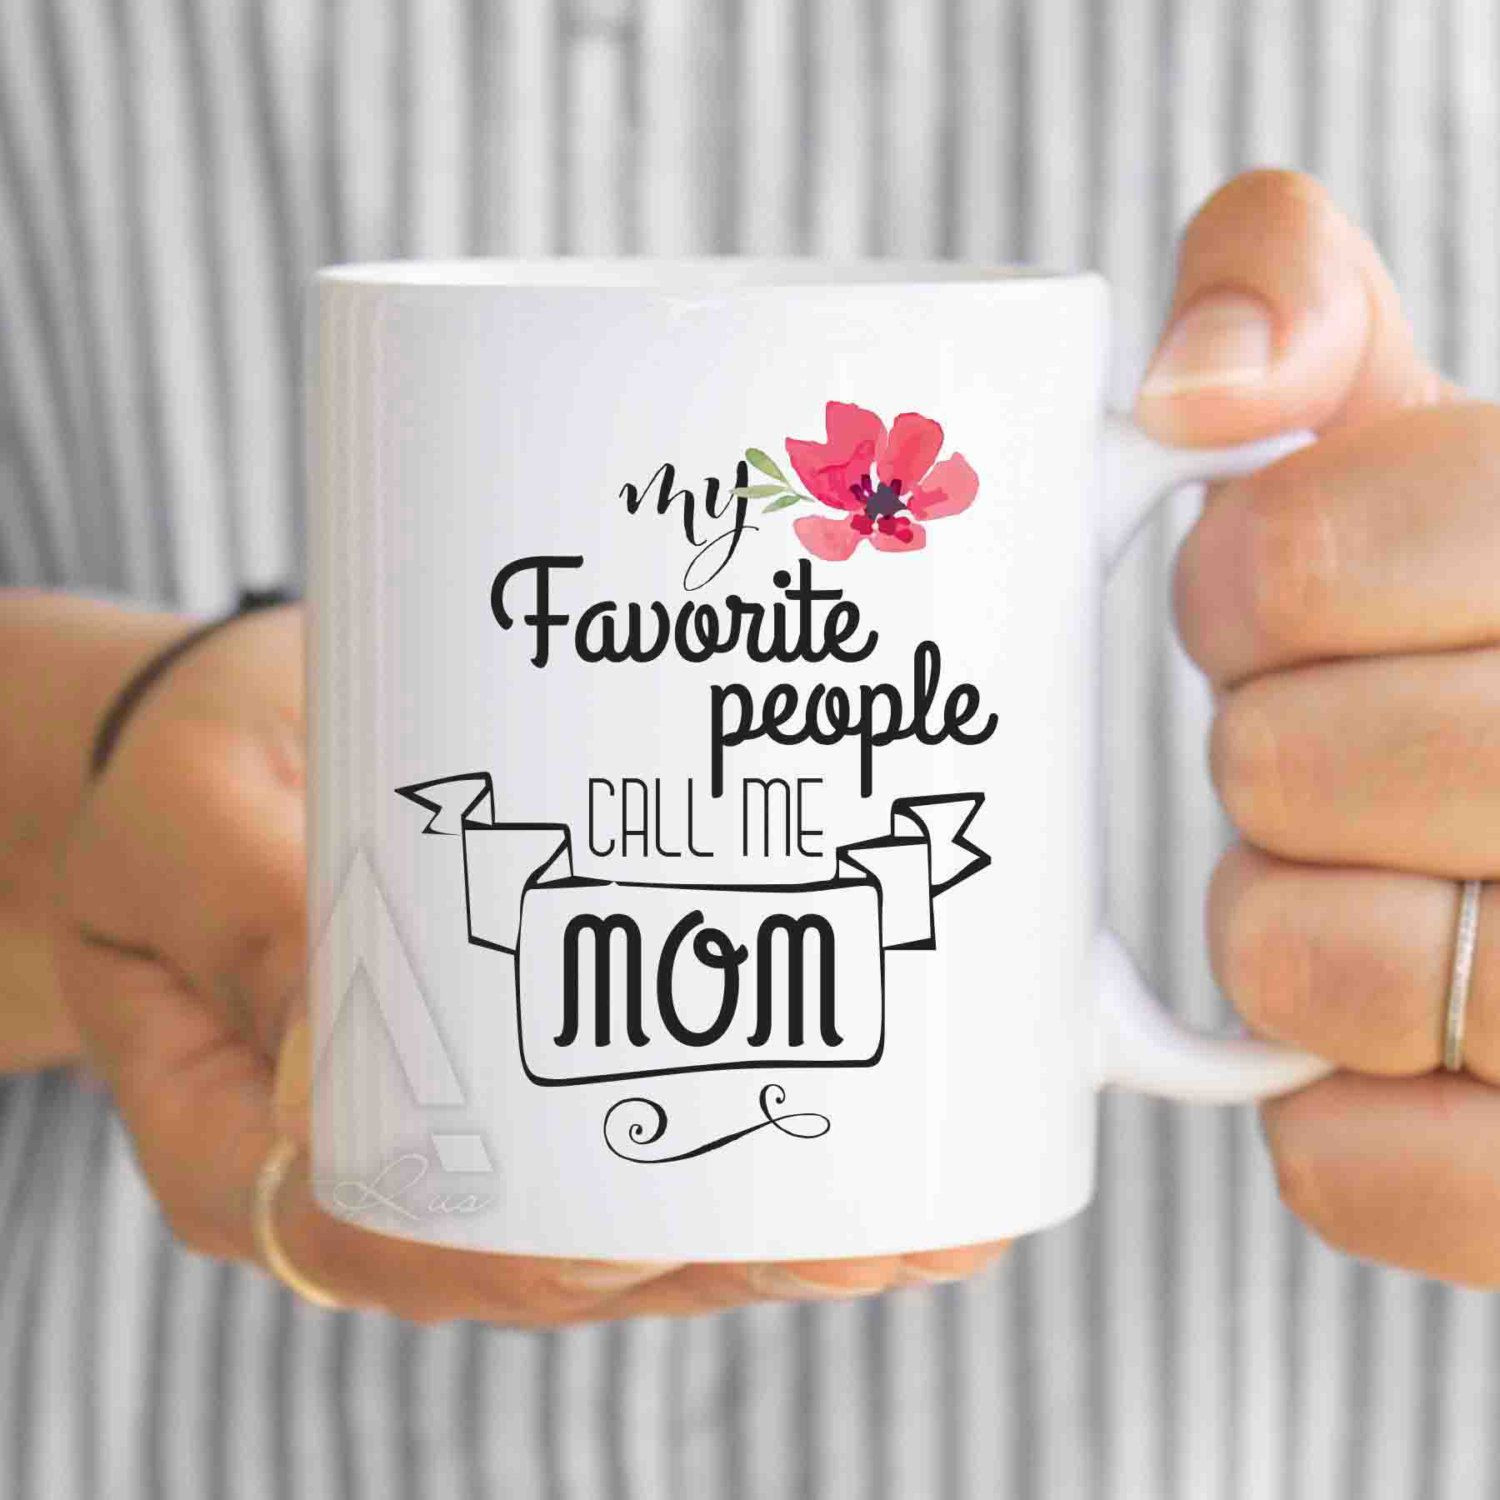 Christmas Gift Ideas For Mom From Son
 christmas ts for mom mom son t "My favorite people